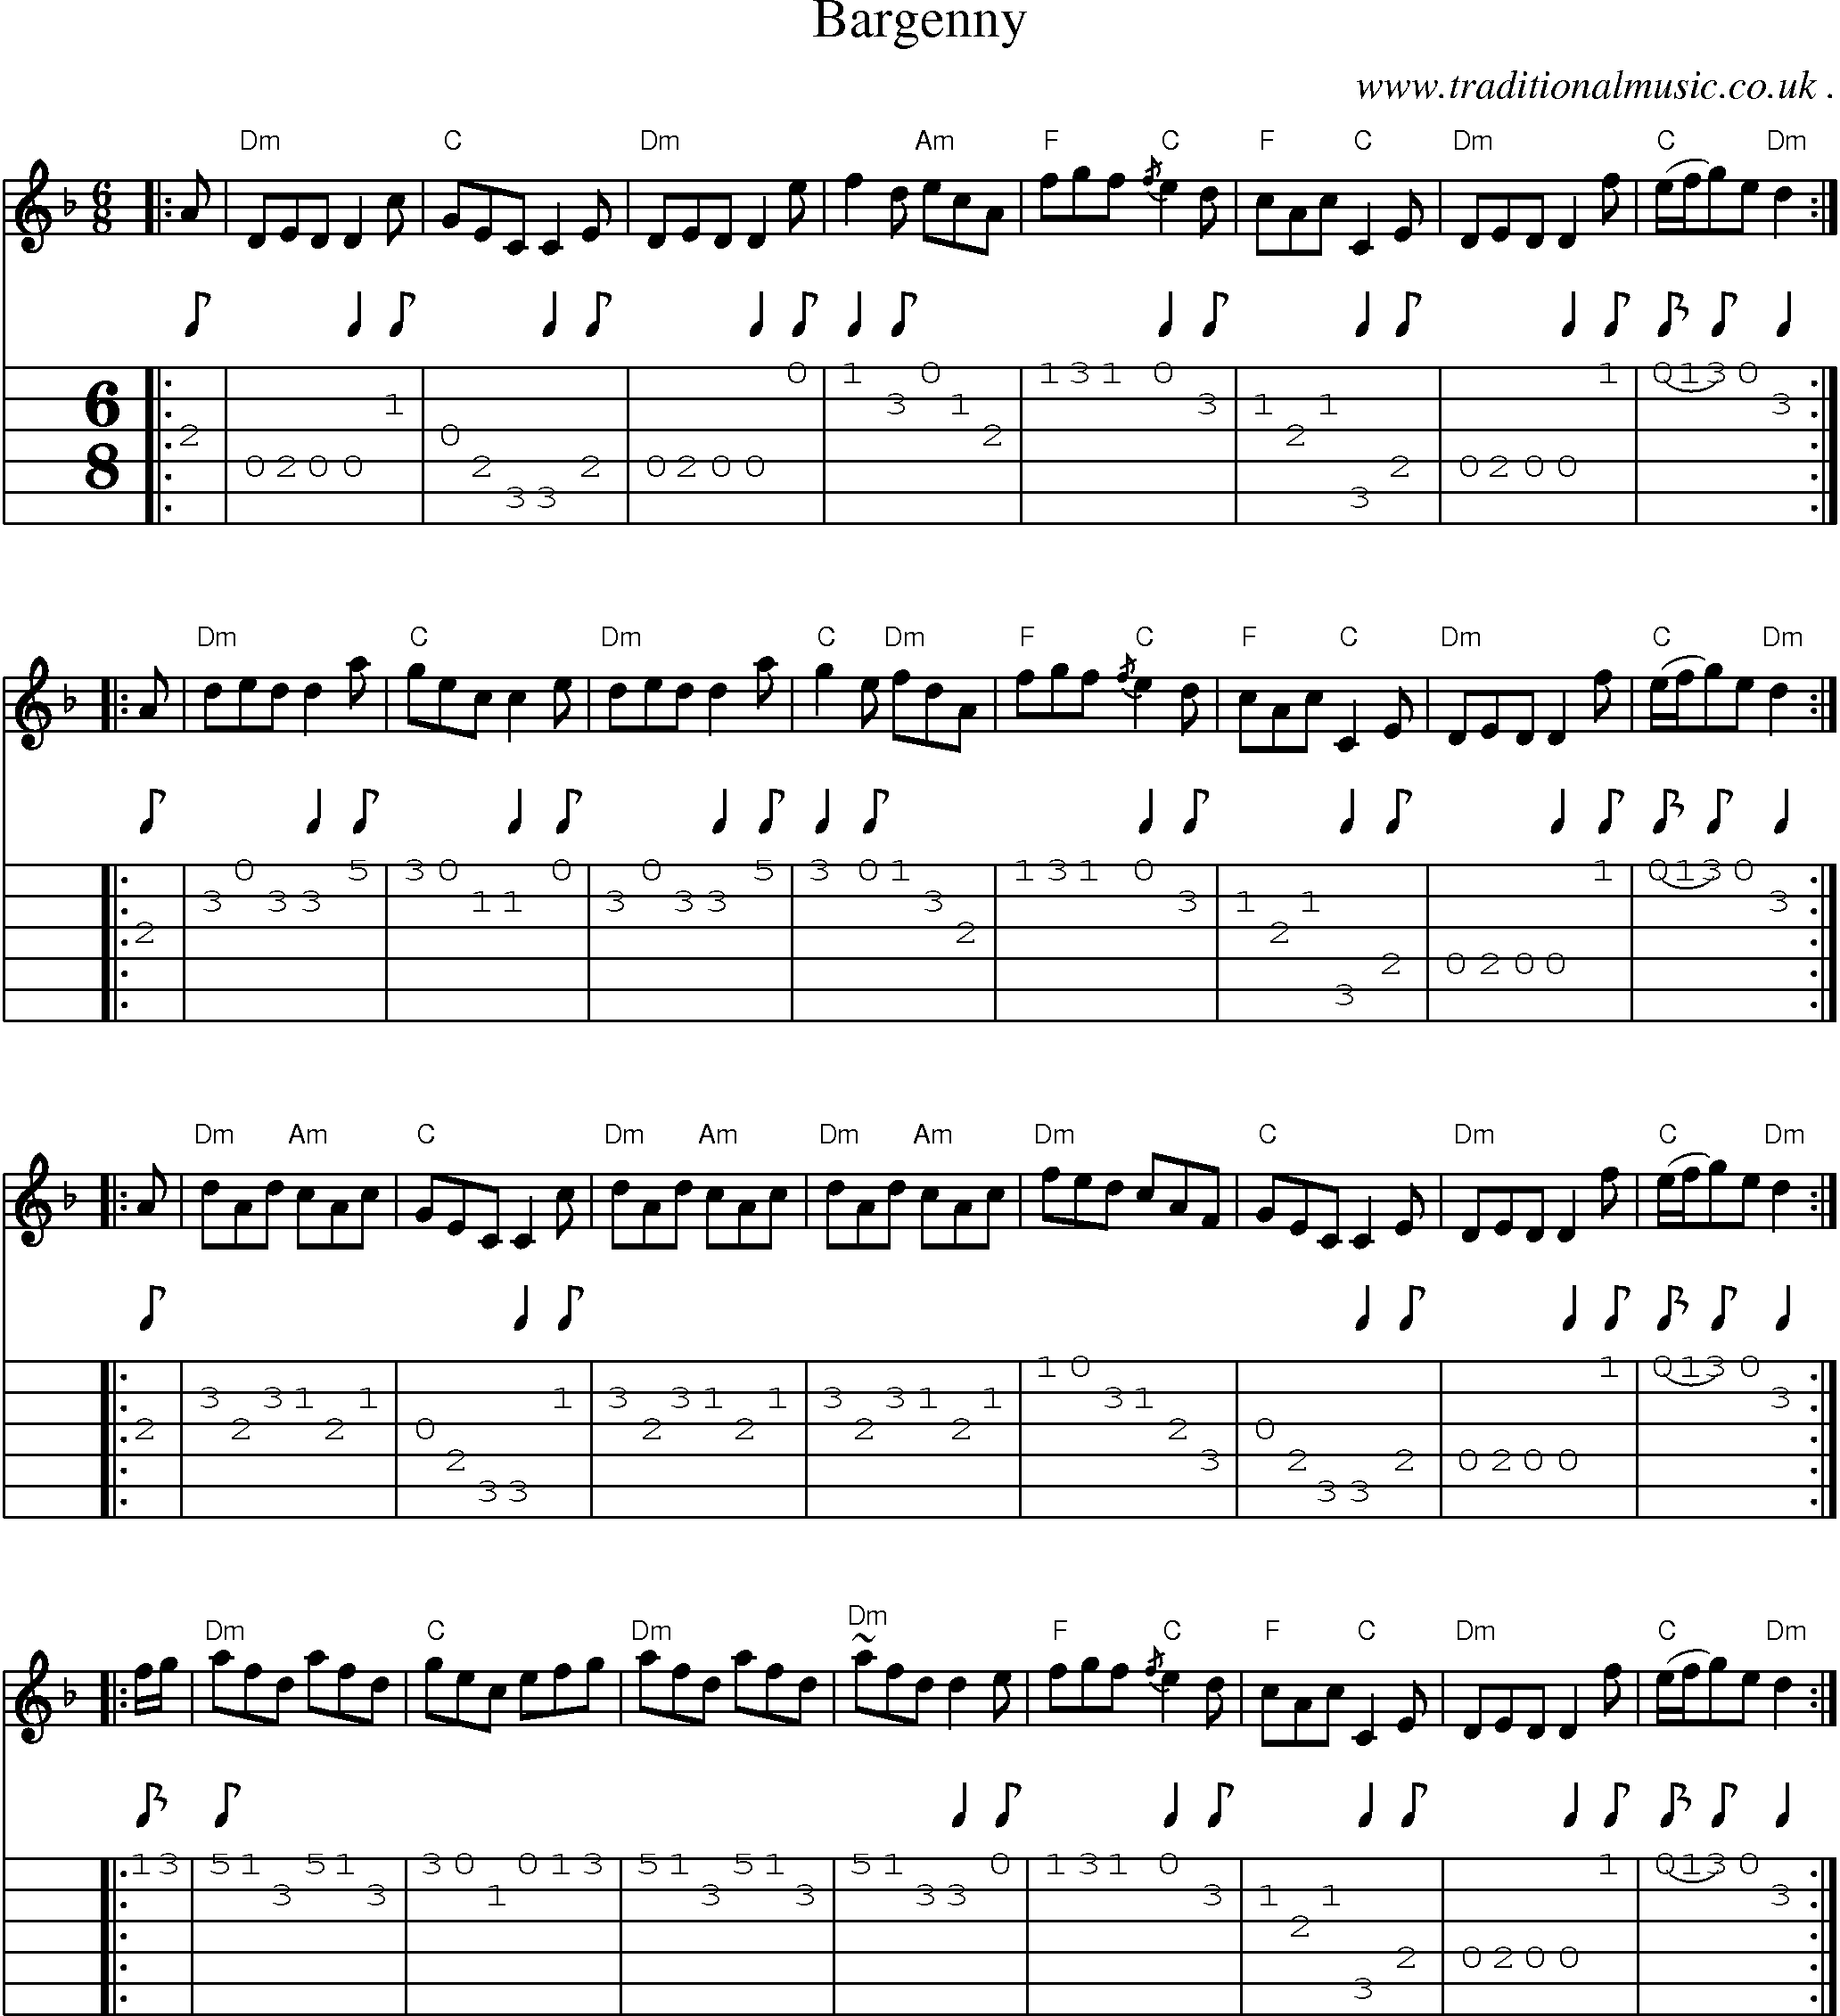 Sheet-music  score, Chords and Guitar Tabs for Bargenny